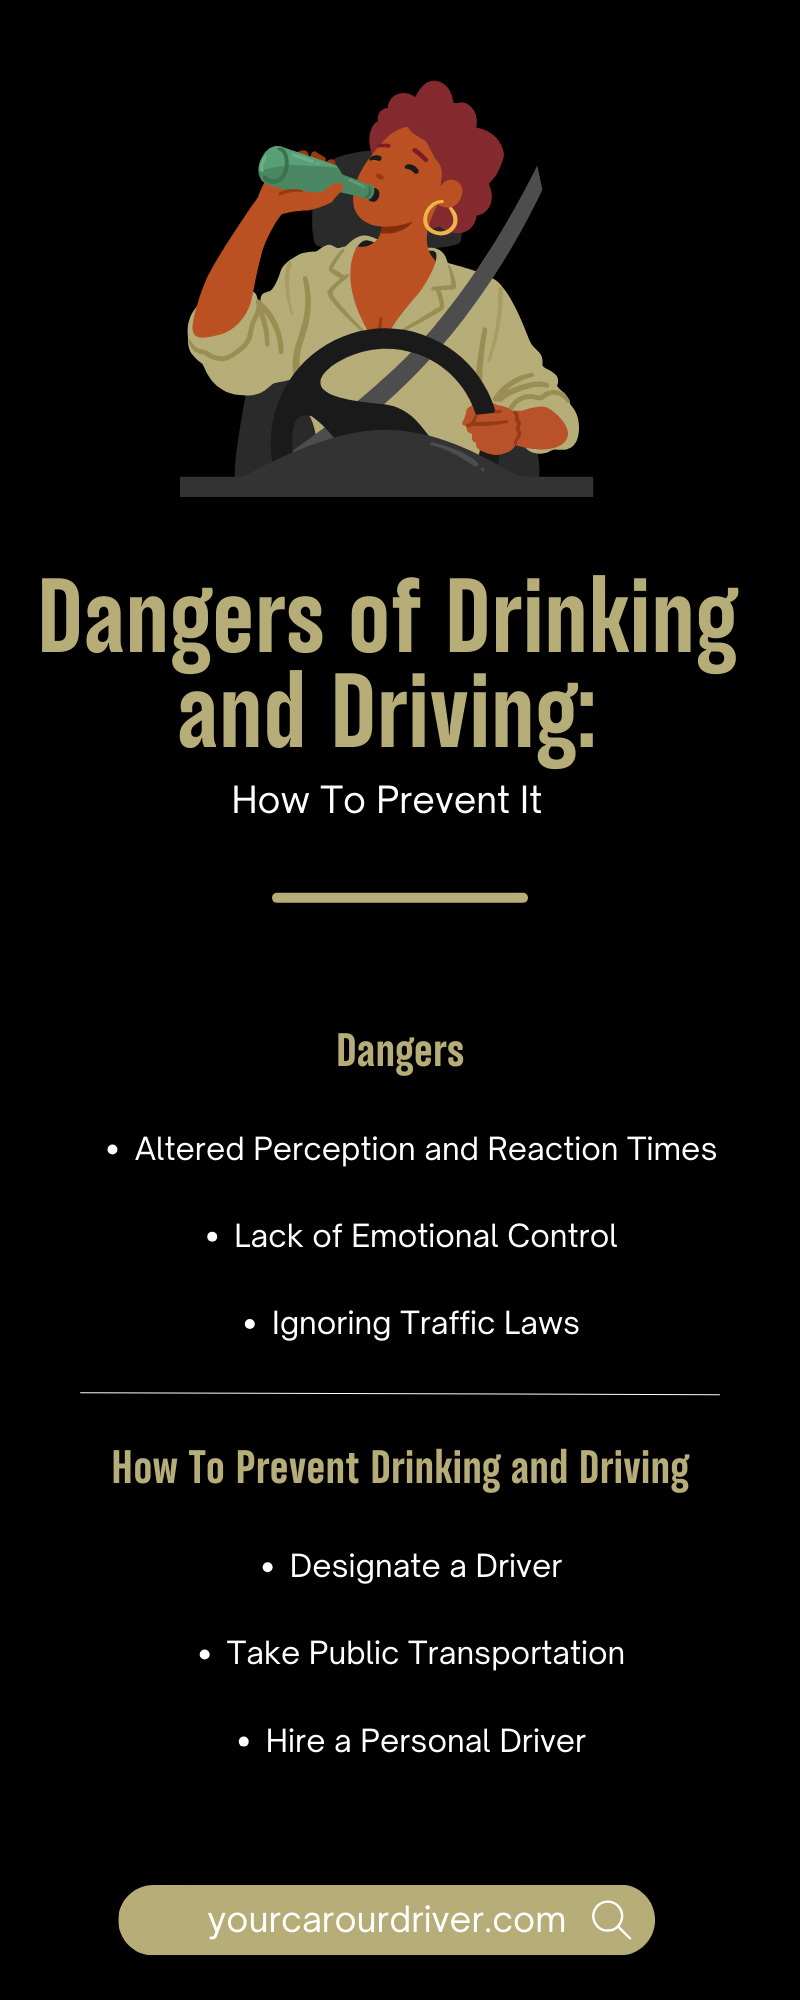 Dangers of Drinking and Driving: How To Prevent It